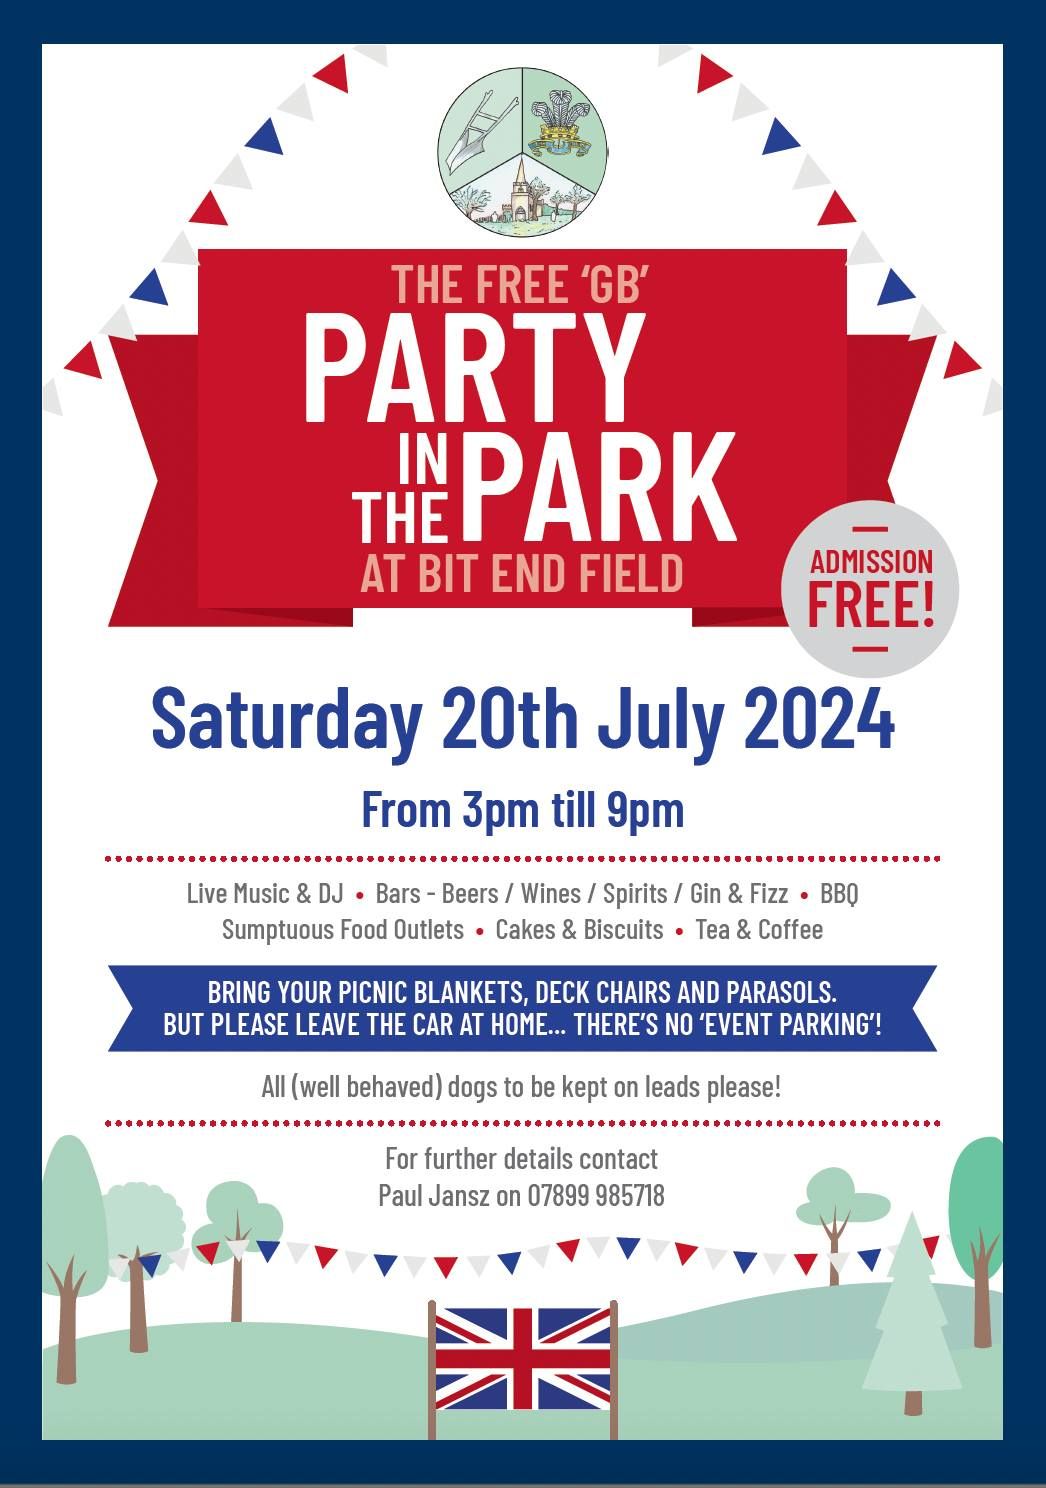 Party in the Park 2024 - Sat 20th July at Bit End Field 3pm-9pm